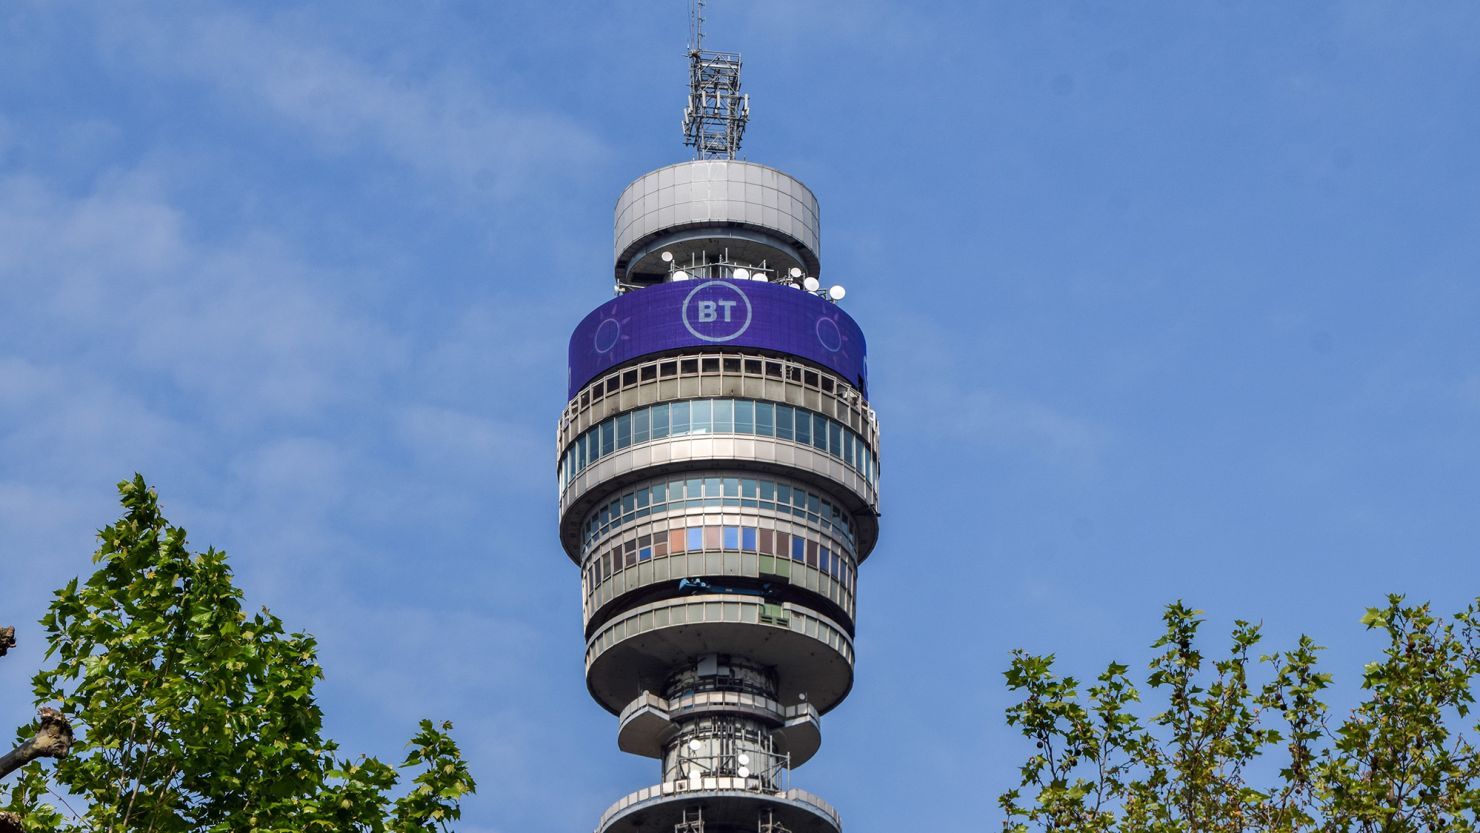 Once London's tallest building, the BT Tower was completed in 1964.